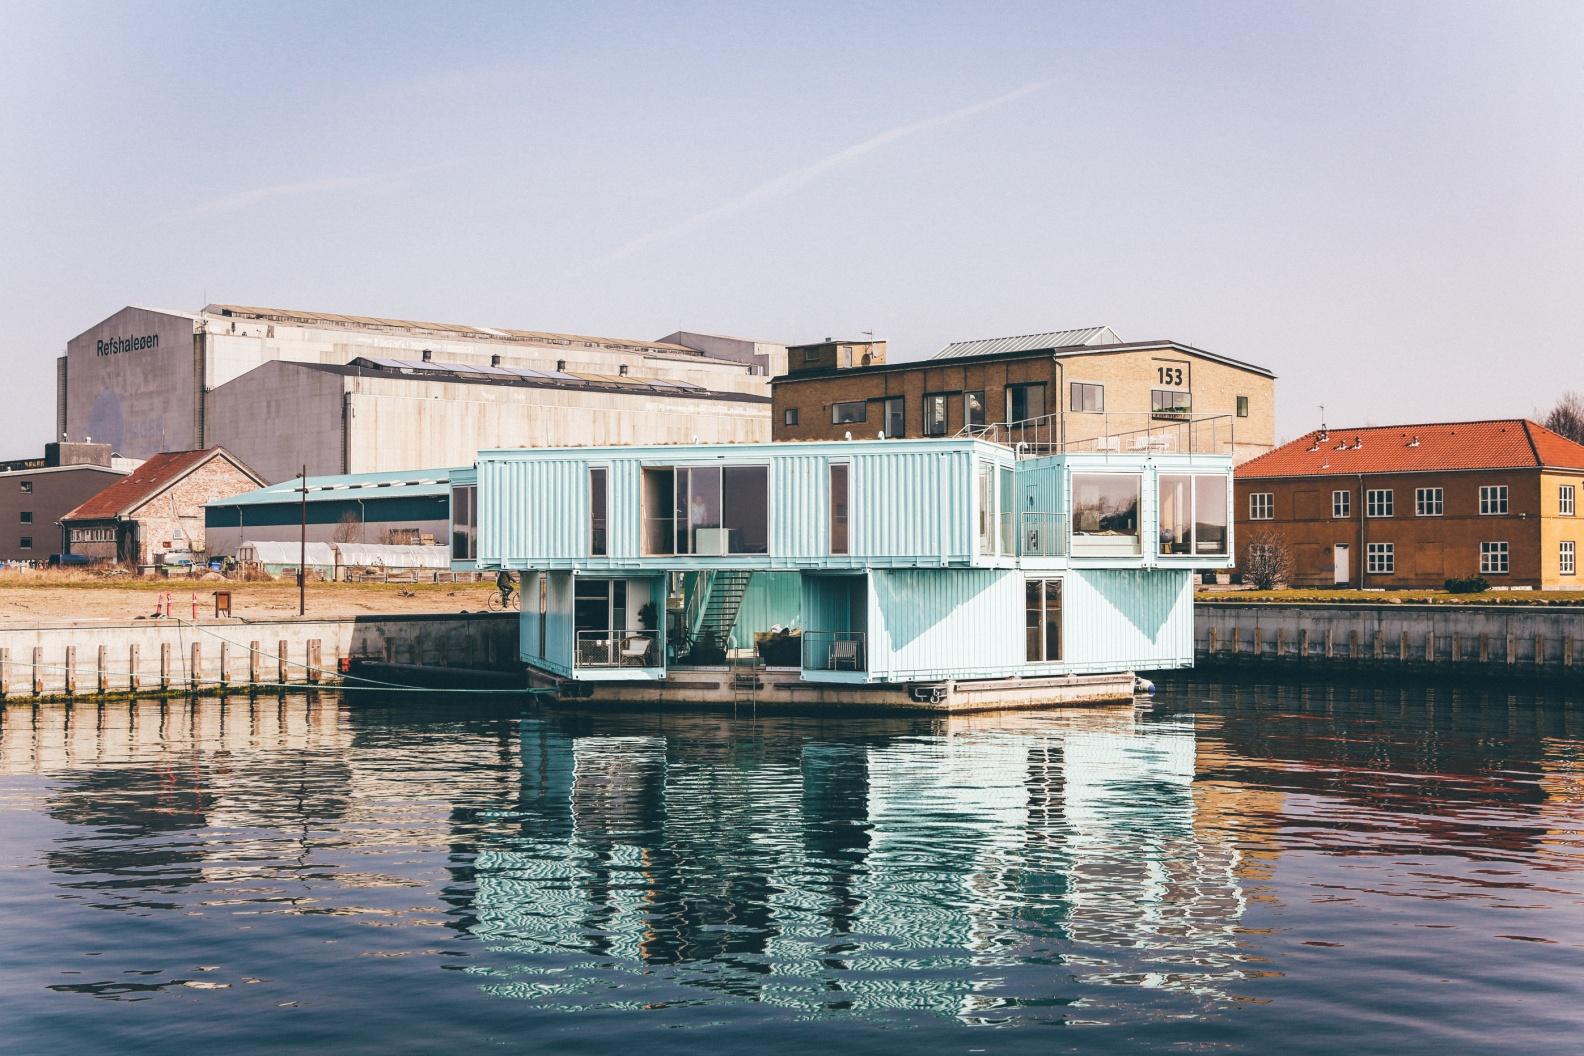 What Makes Container Homes So Great and What Makes Them Not